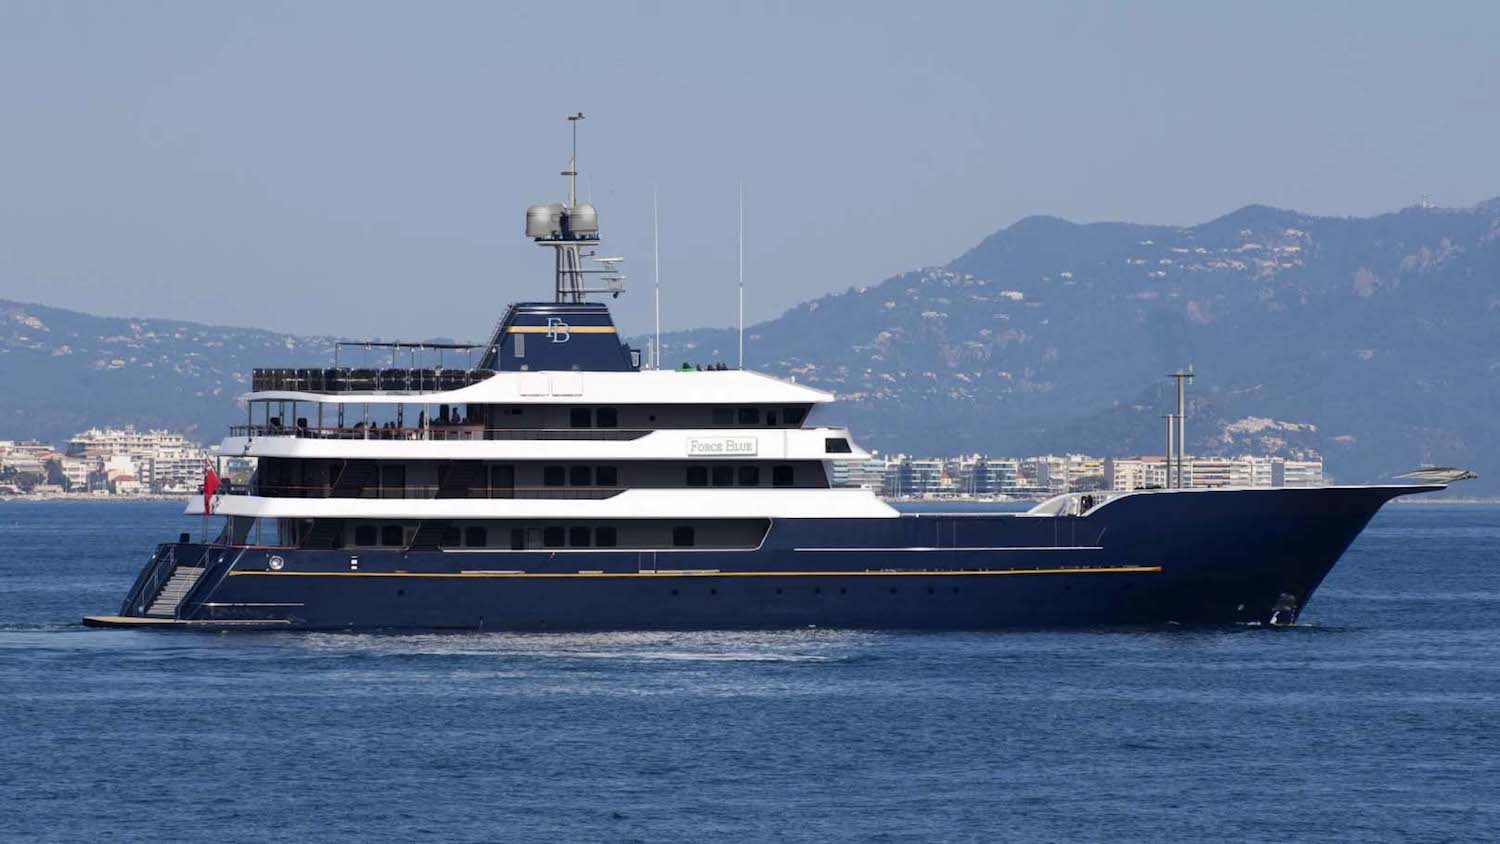 who owns superyacht force blue